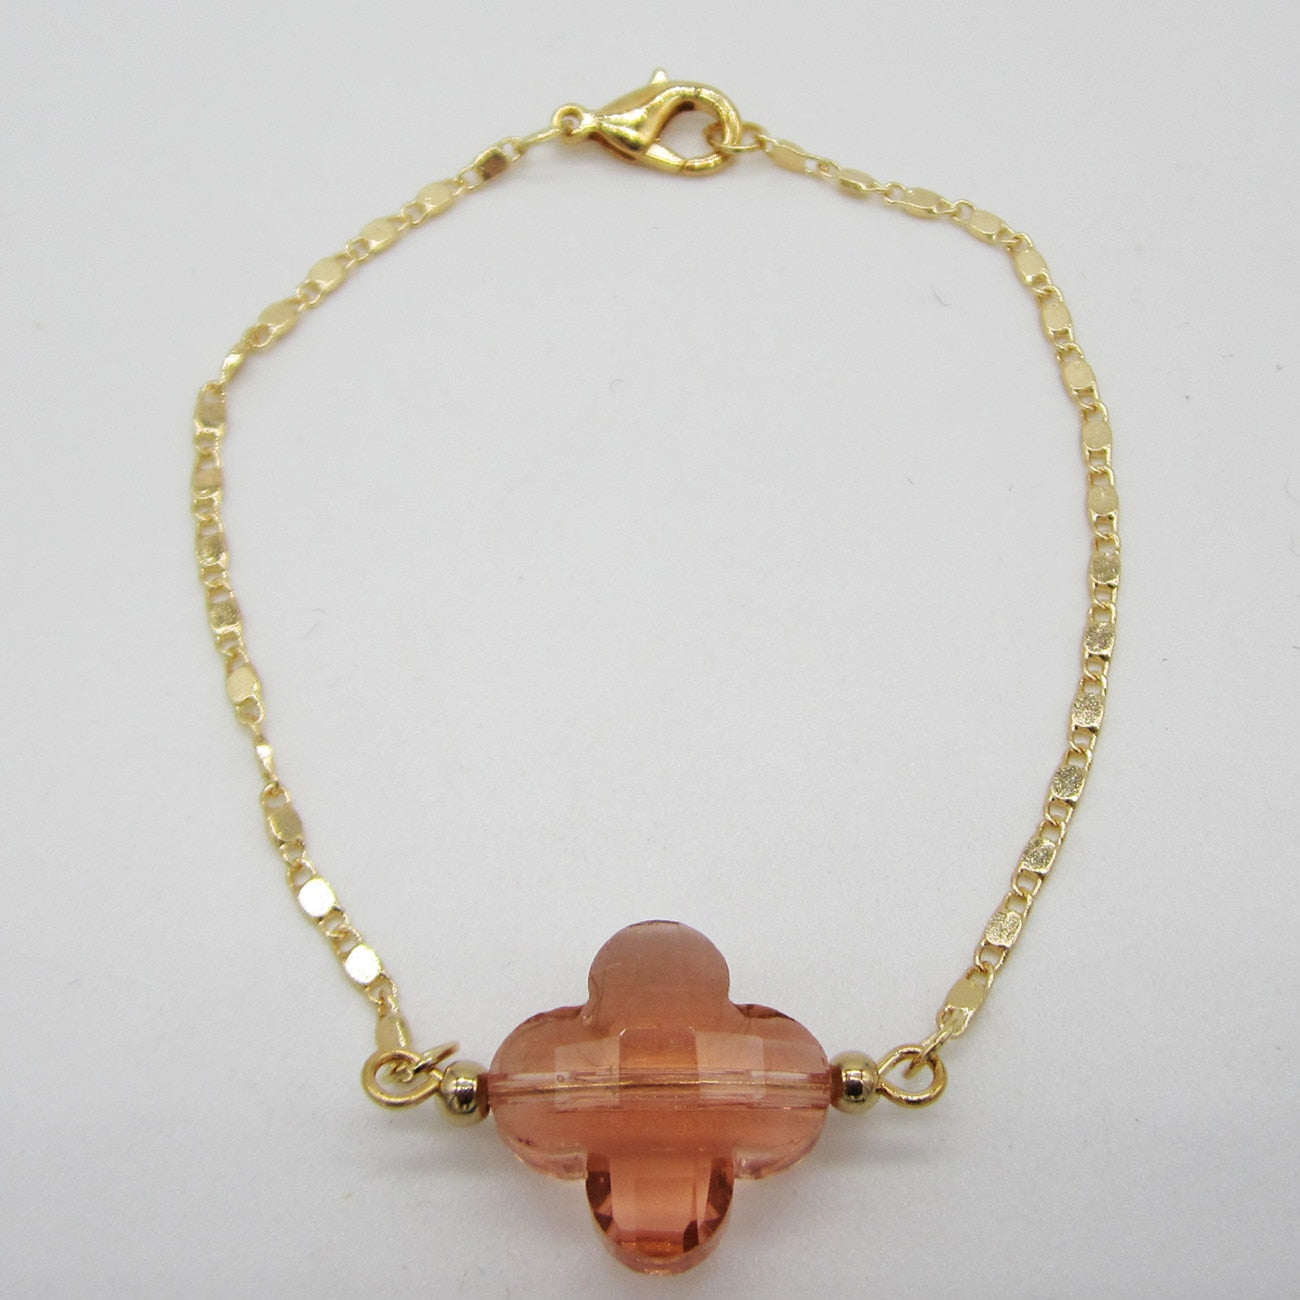 Statement Crystal Four Leaf Clover Copper Chain Bracelet For Women And Men